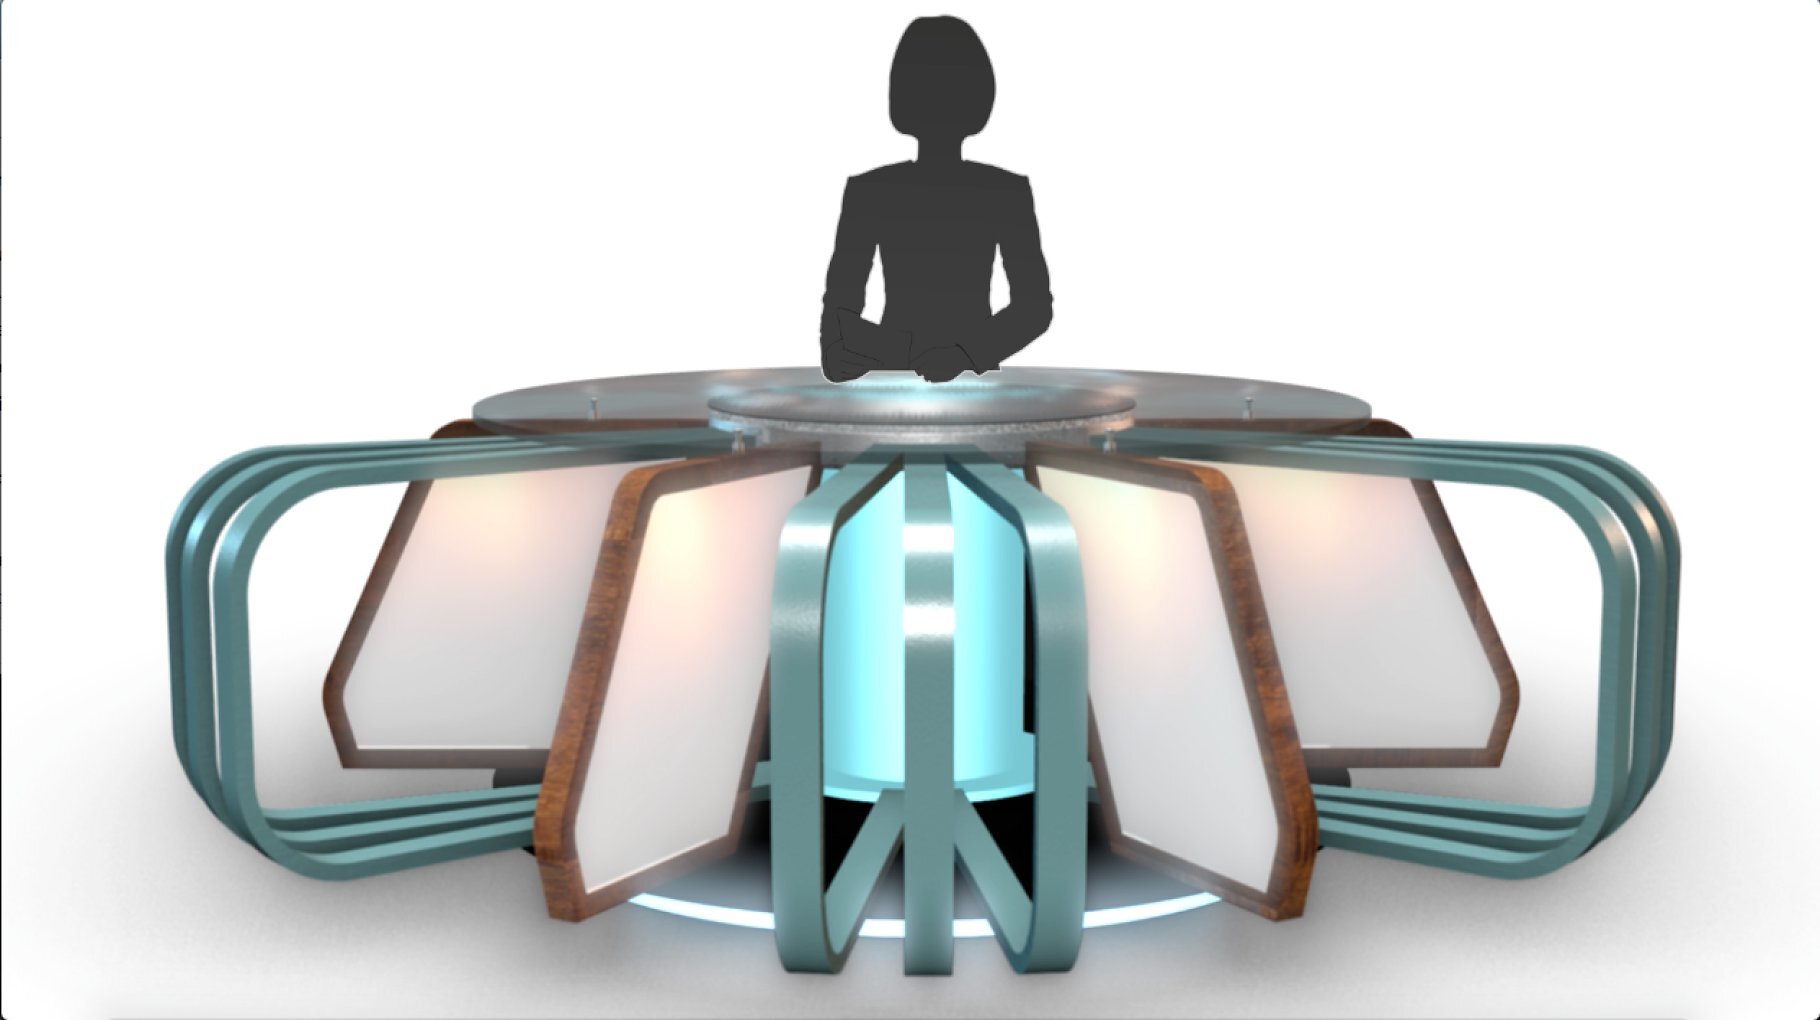 Image of a TV news studio with a silhouette of a presenter.